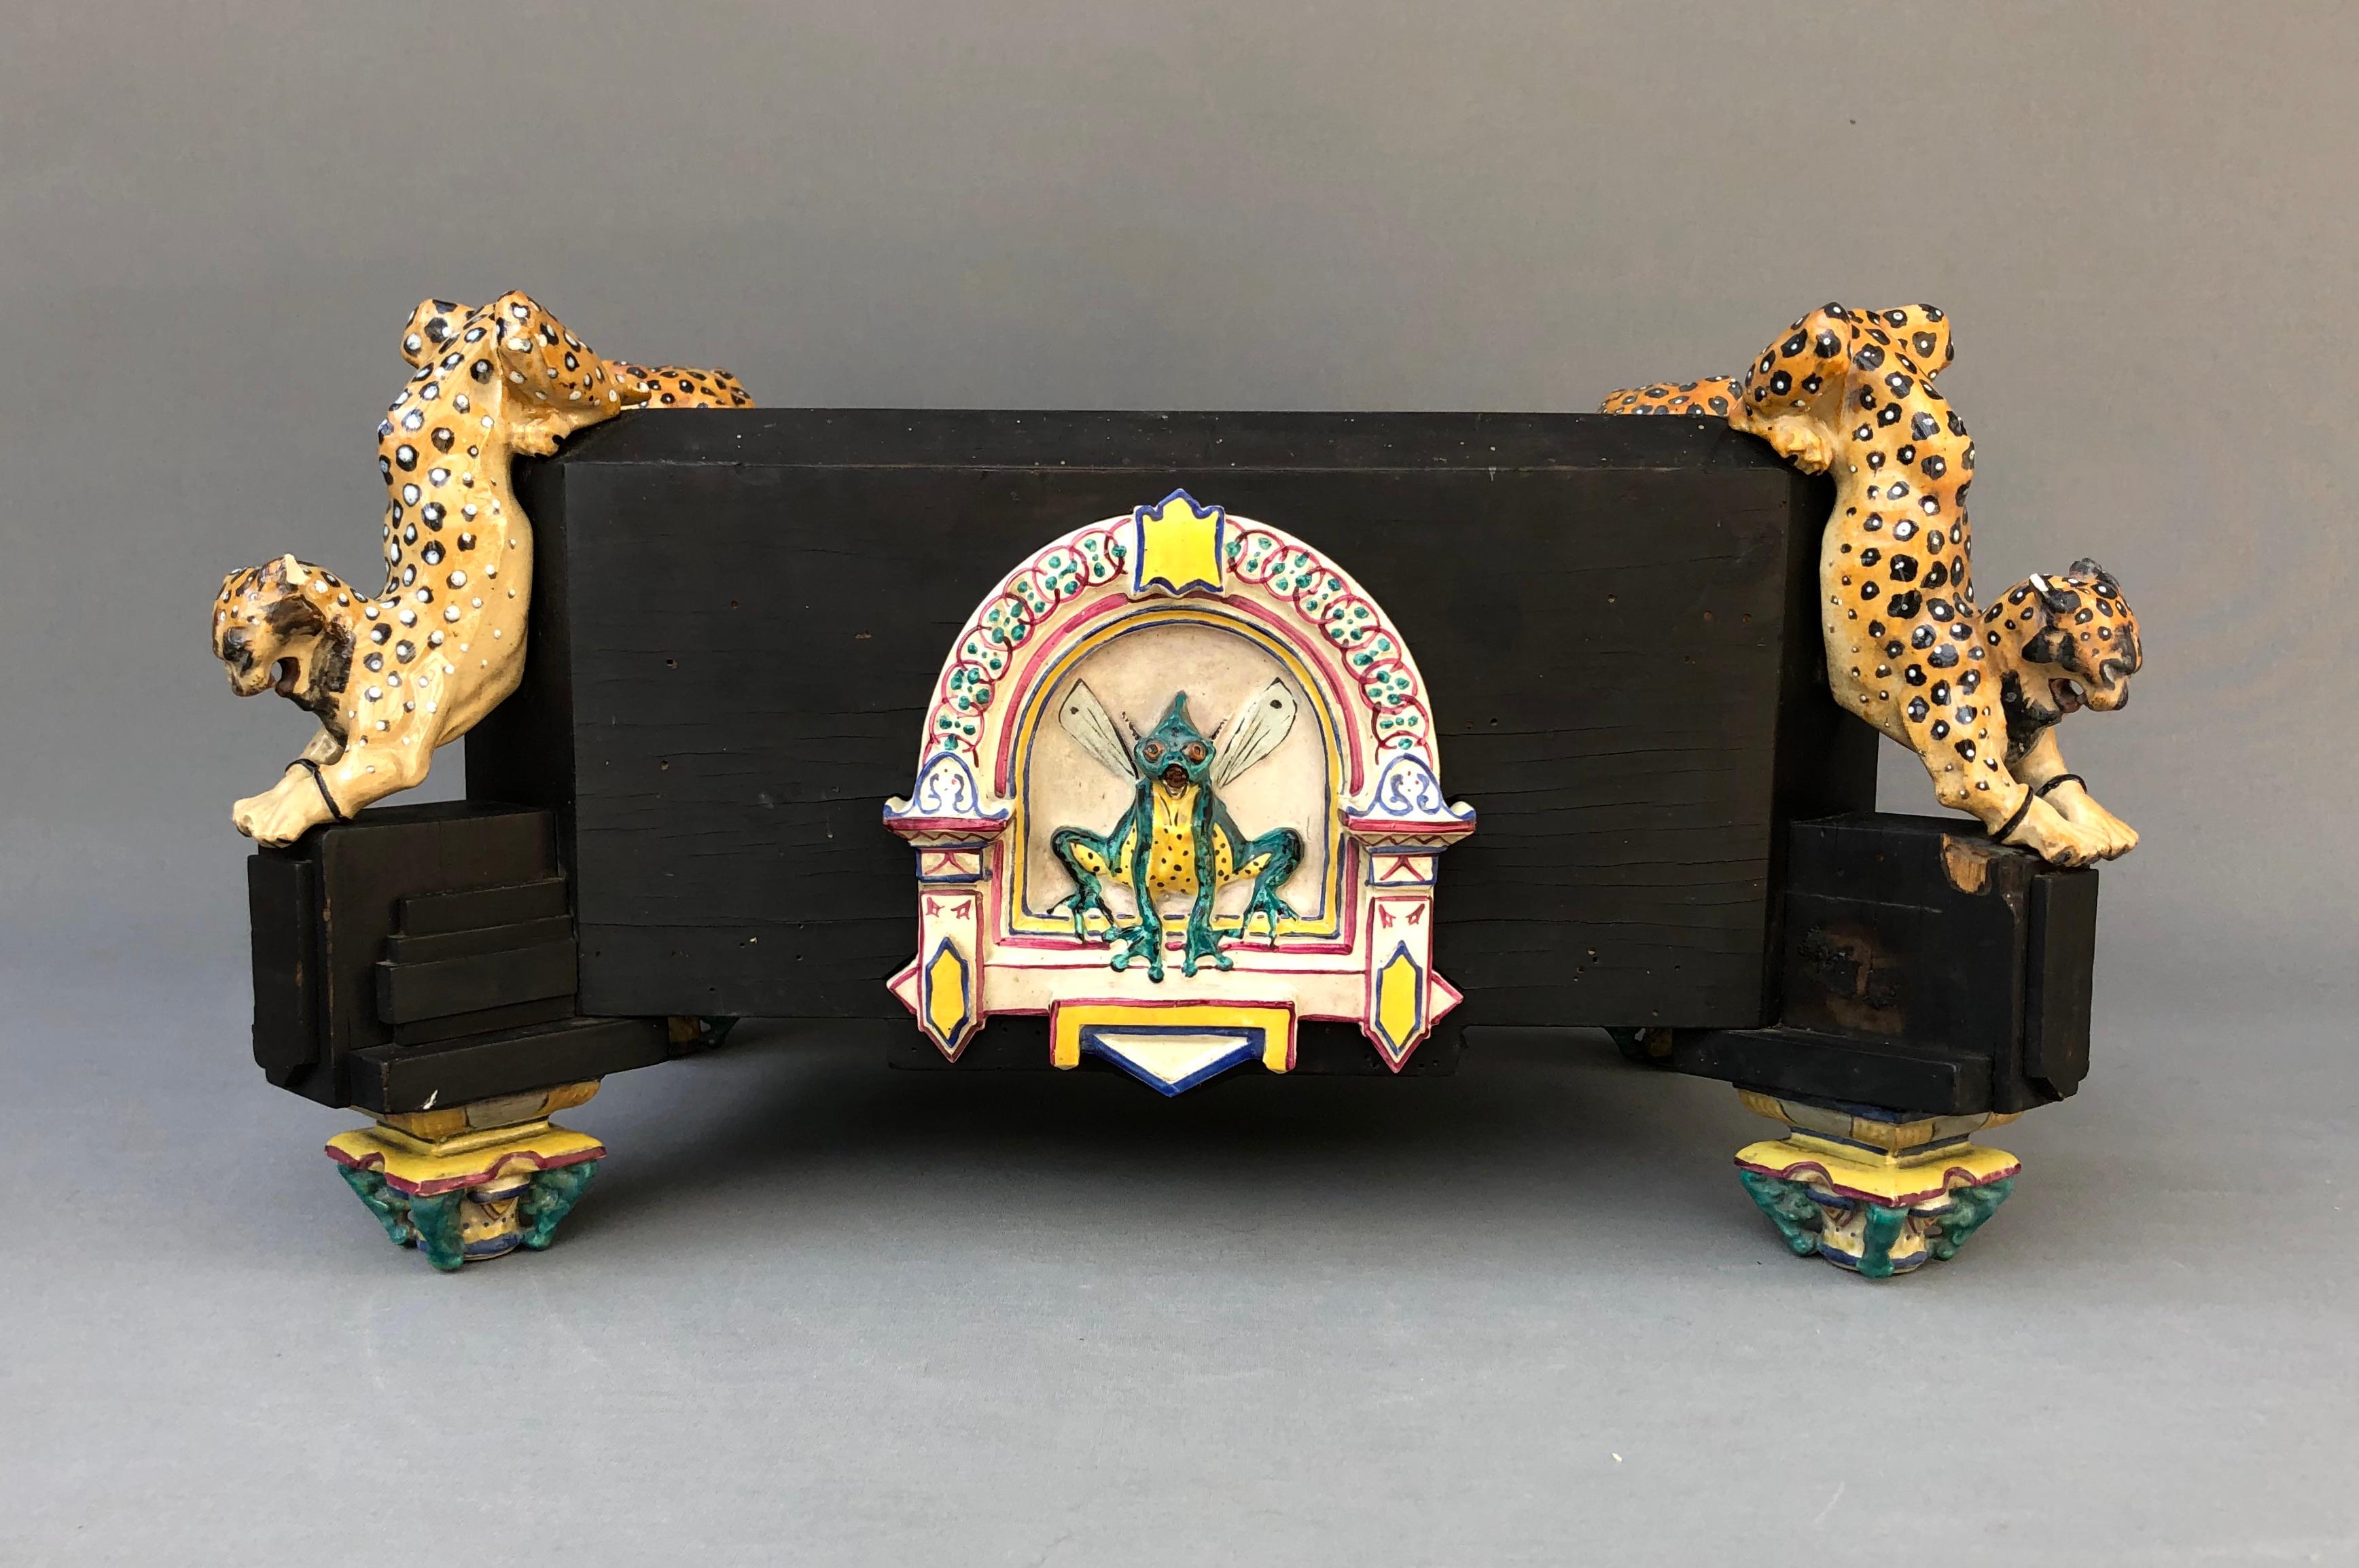 After Charles-Guillaume DIEHL (1811-1885) & Emmanuel FRÉMIET (1824-1910)
Blackened wooden planter decorated with arched felines, the central niche decorated with a fantastic creature in polychrome ceramic.
The feet feature polychrome ceramic Chinese